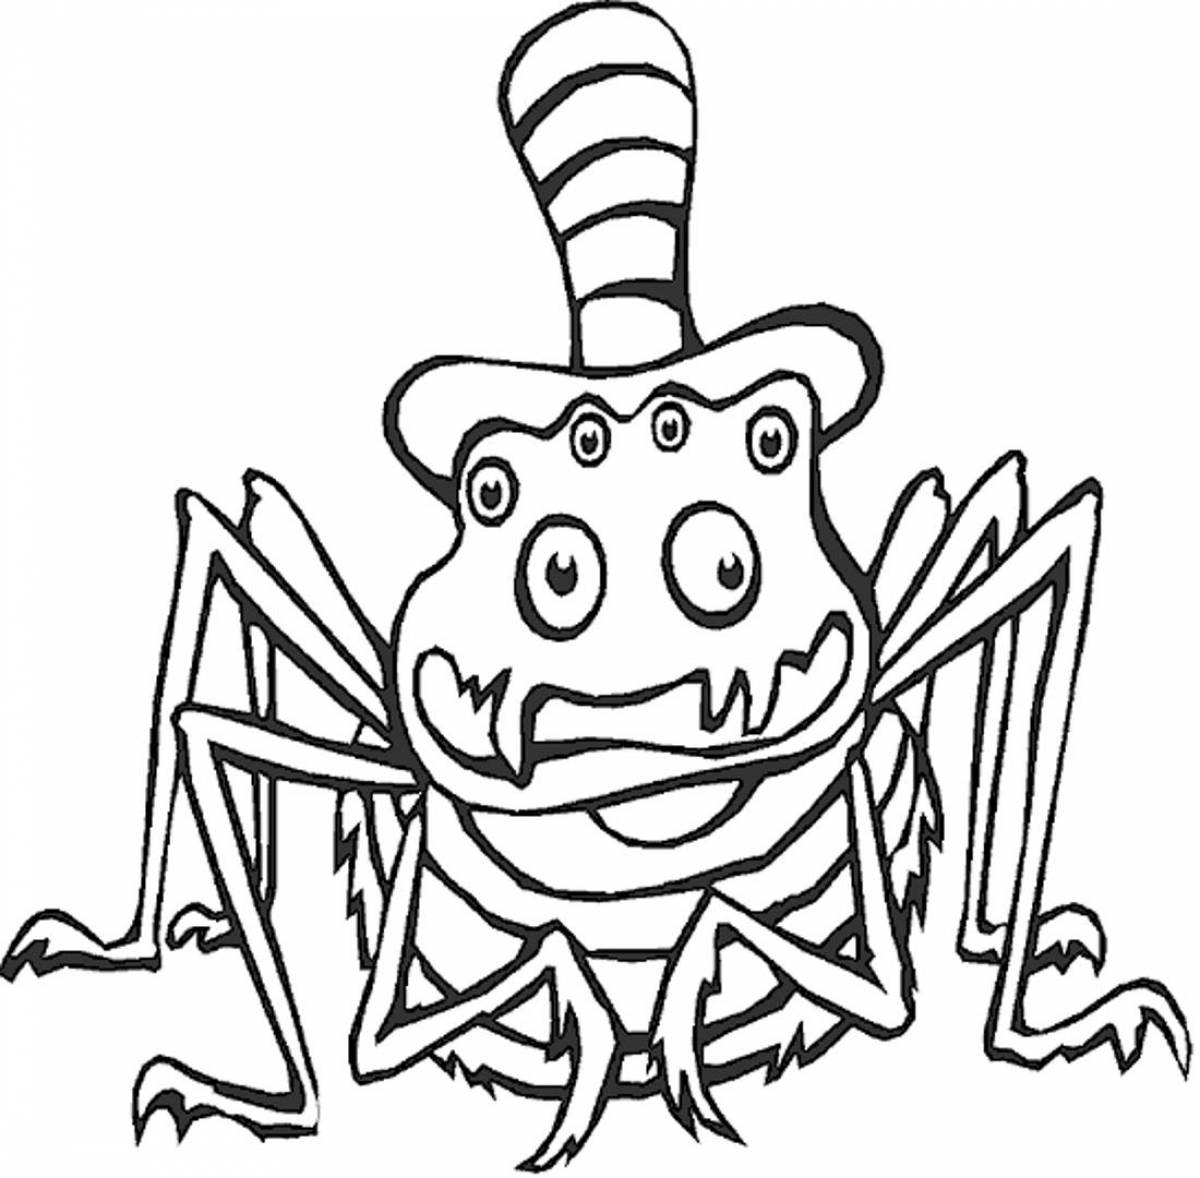 Coloring page nice fly